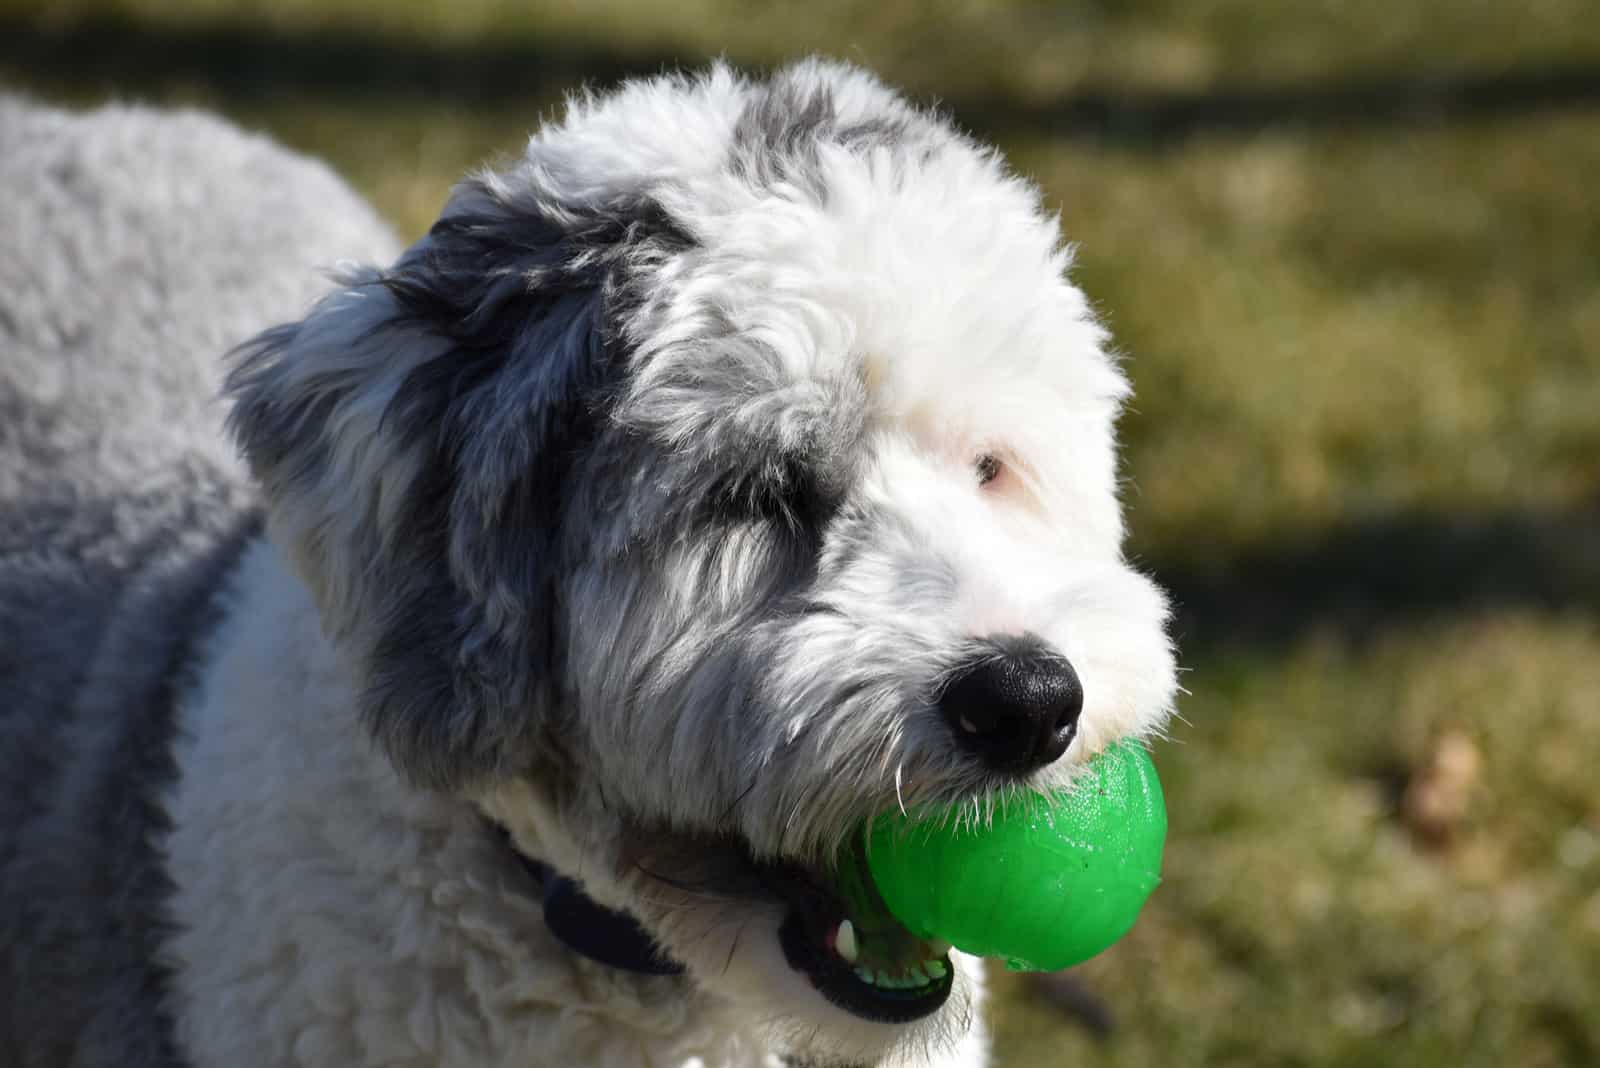 the mini sheepadoodle holds the ball in his mouth